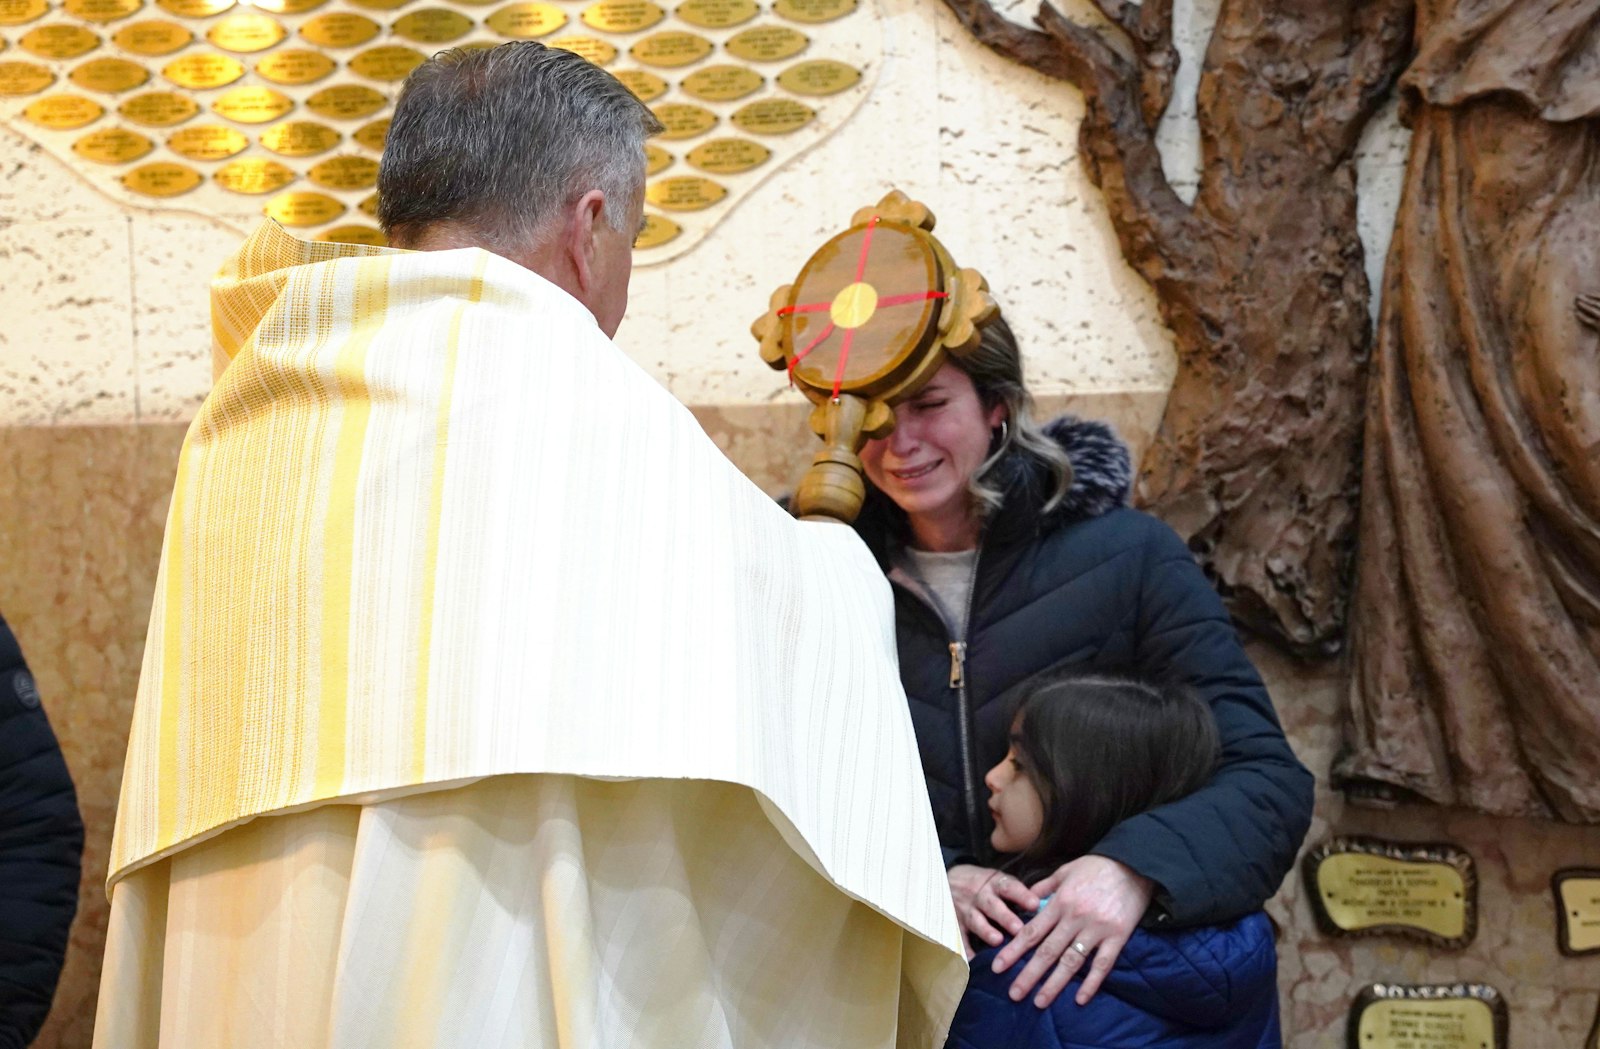 Fr. Grankowski of St. Barbara Parish blesses Mary Lou Lopez with the relic of St. Padre Pio. Mary Lou Lopez's son, Damien, recently had open-heart surgery, so the family came to St. Barbara Parish to pray for St. Padre Pio's intercession. (Daniel Meloy | Detroit Catholic)